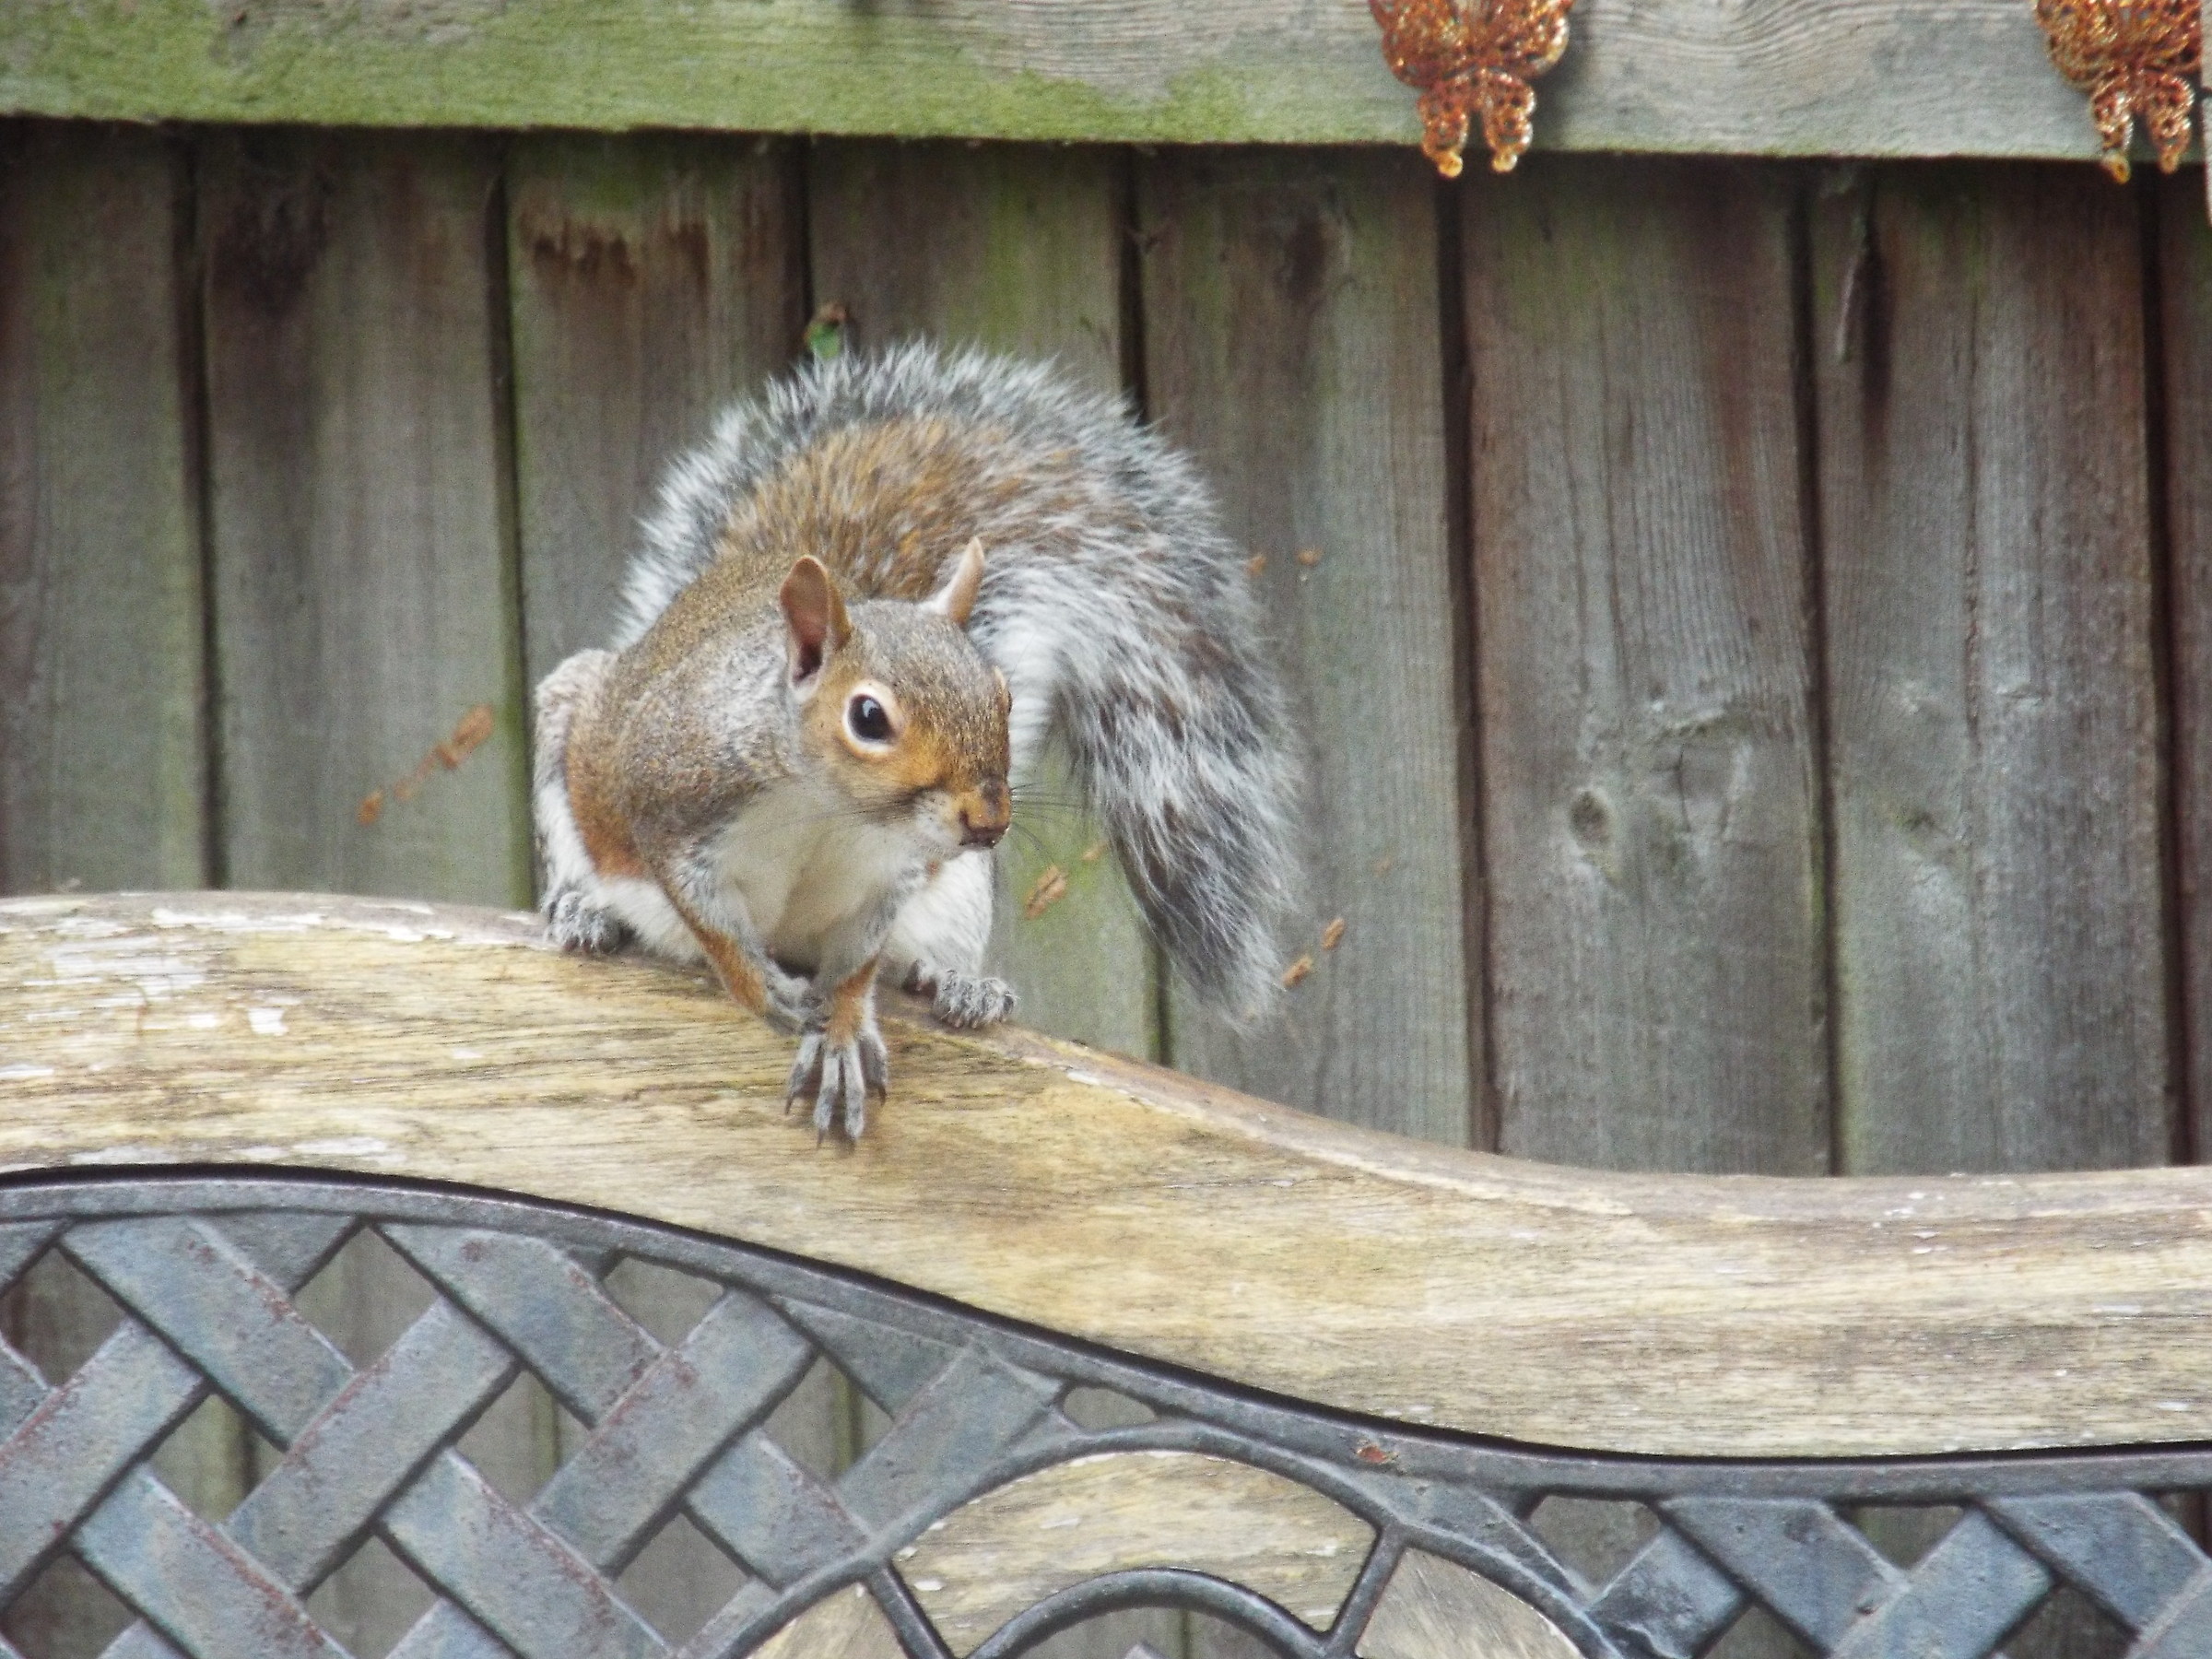 Squirrel on bench...